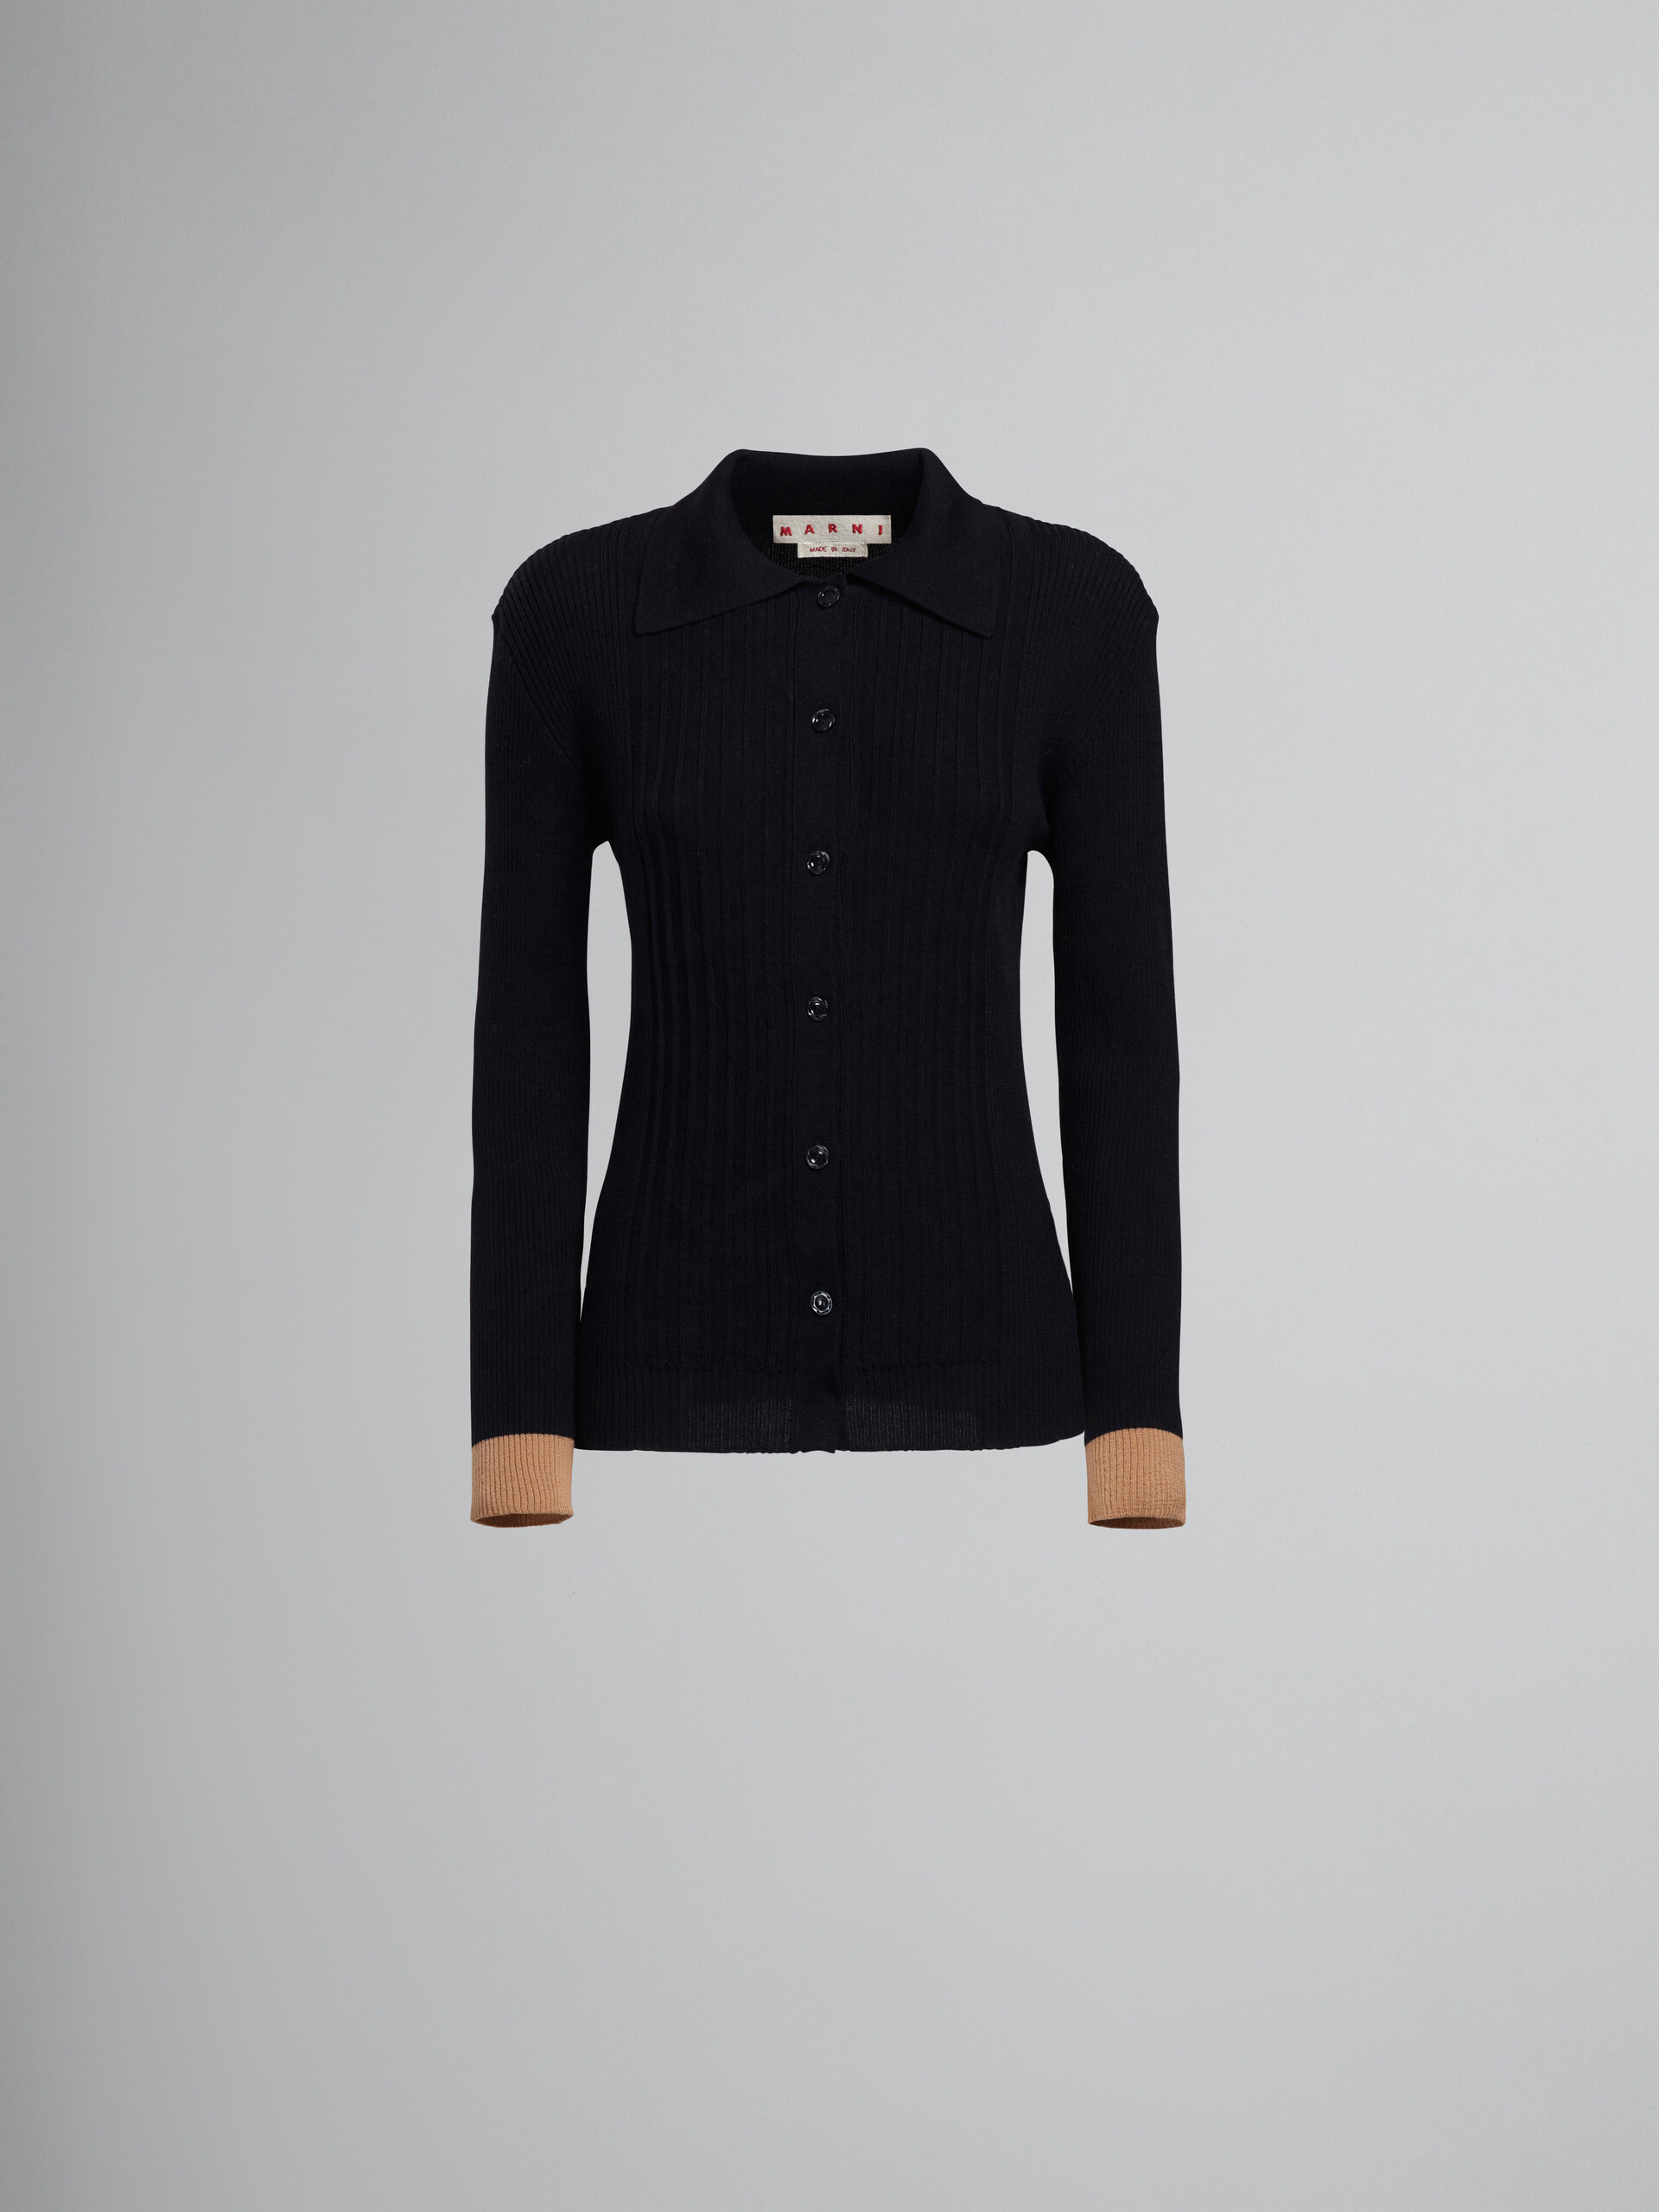 Black wool cardigan with contrasting cuffs - Pullovers - Image 1